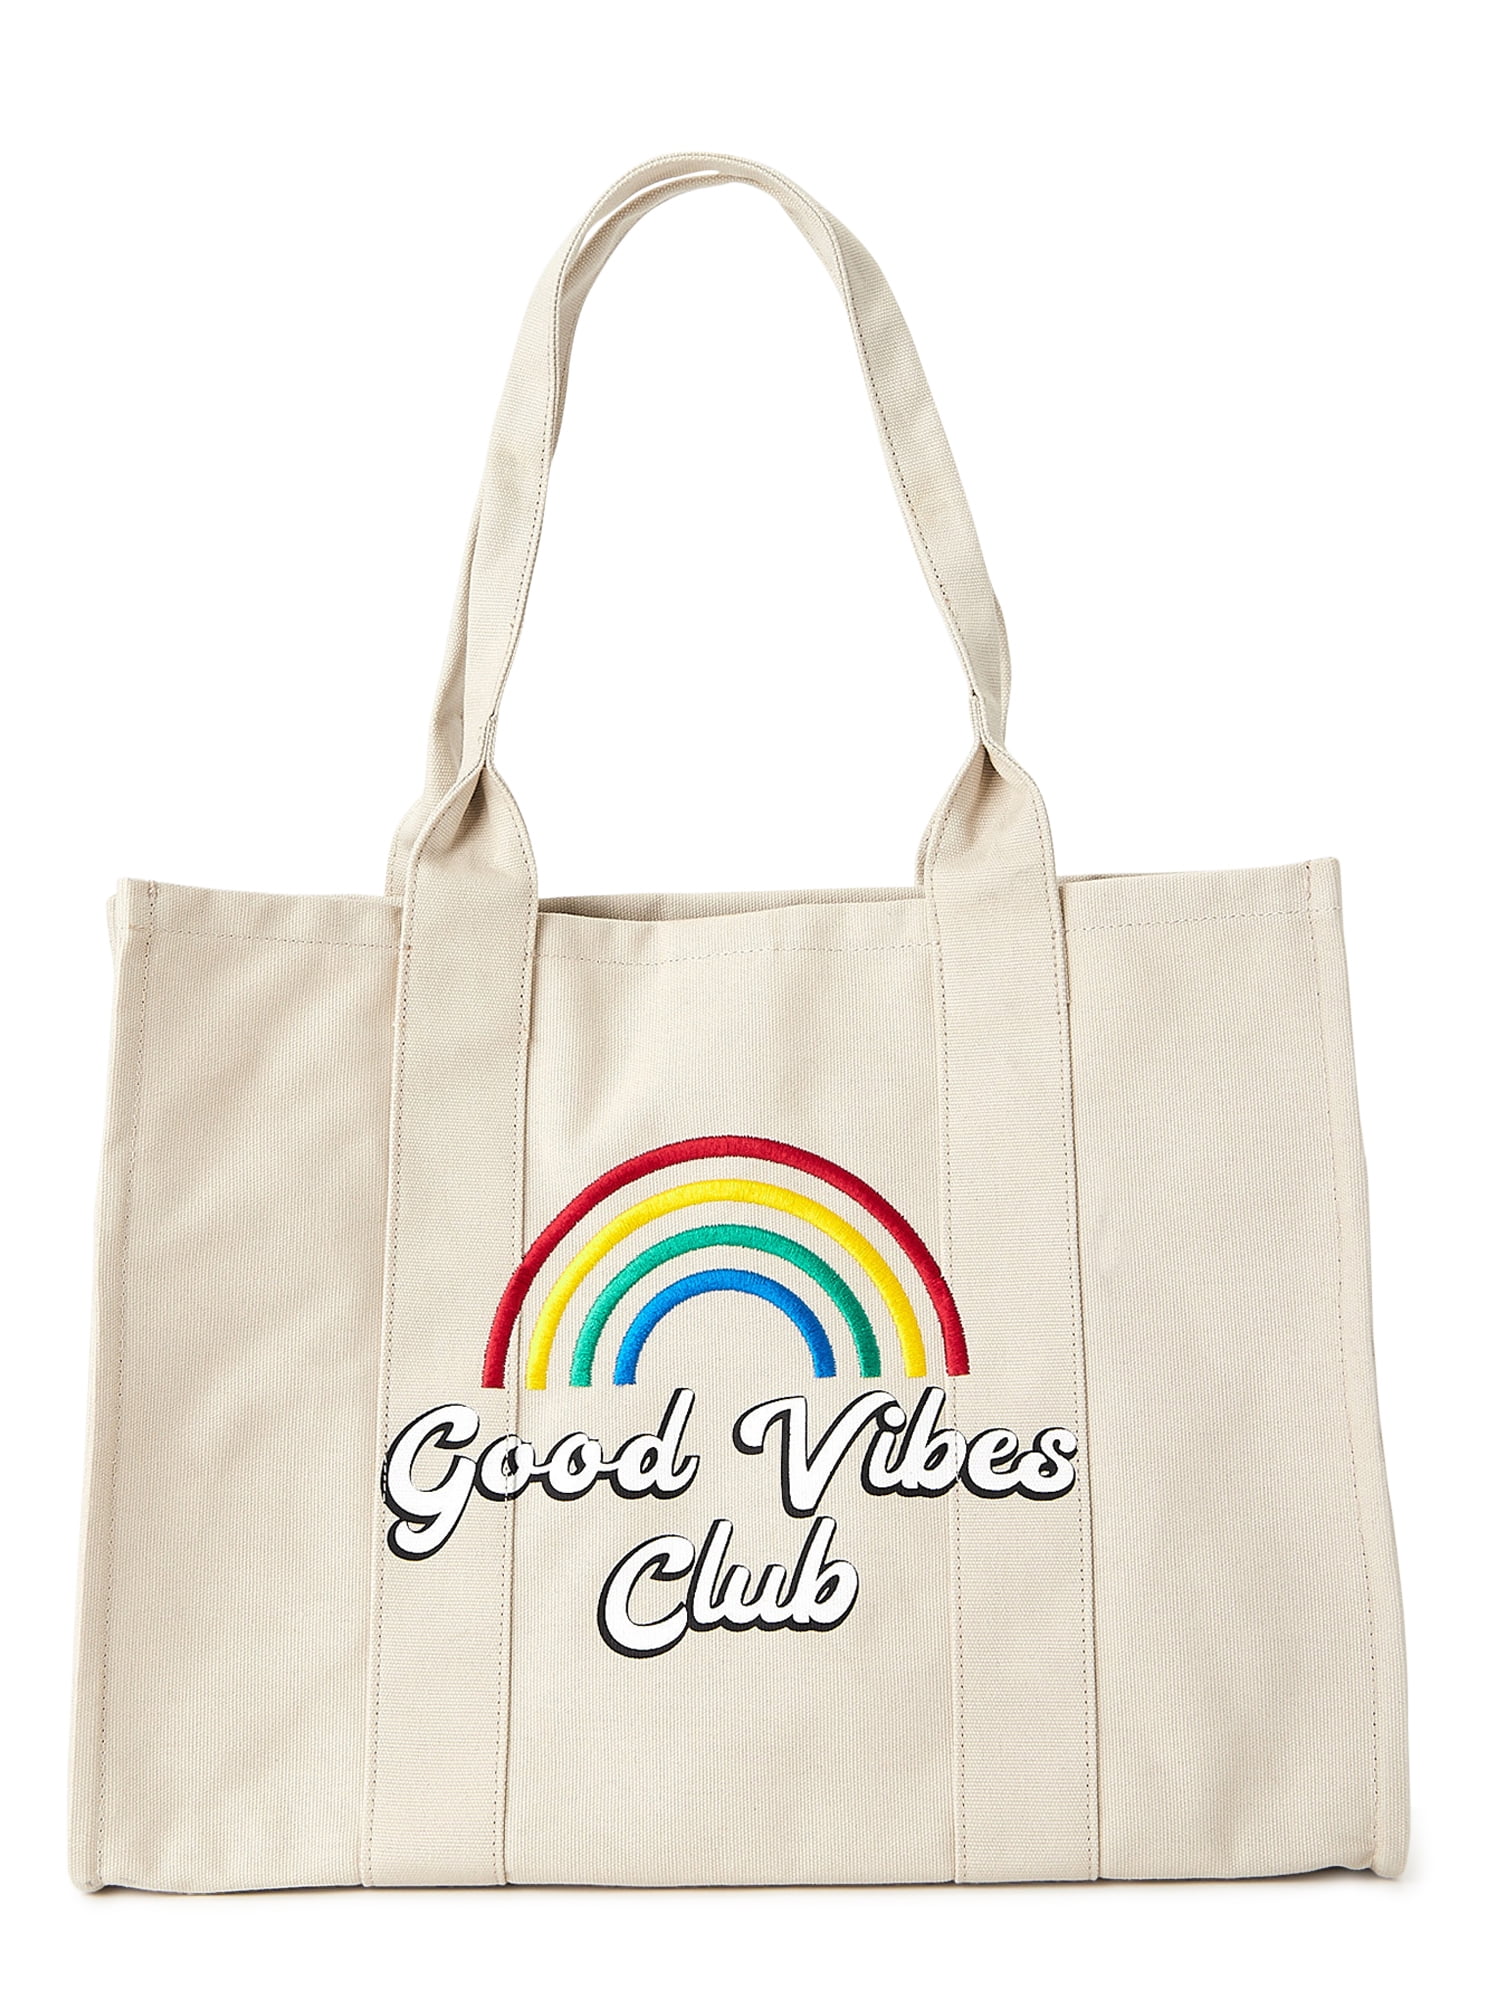 Show Your True Colors: Happy Dog | Tote Bag